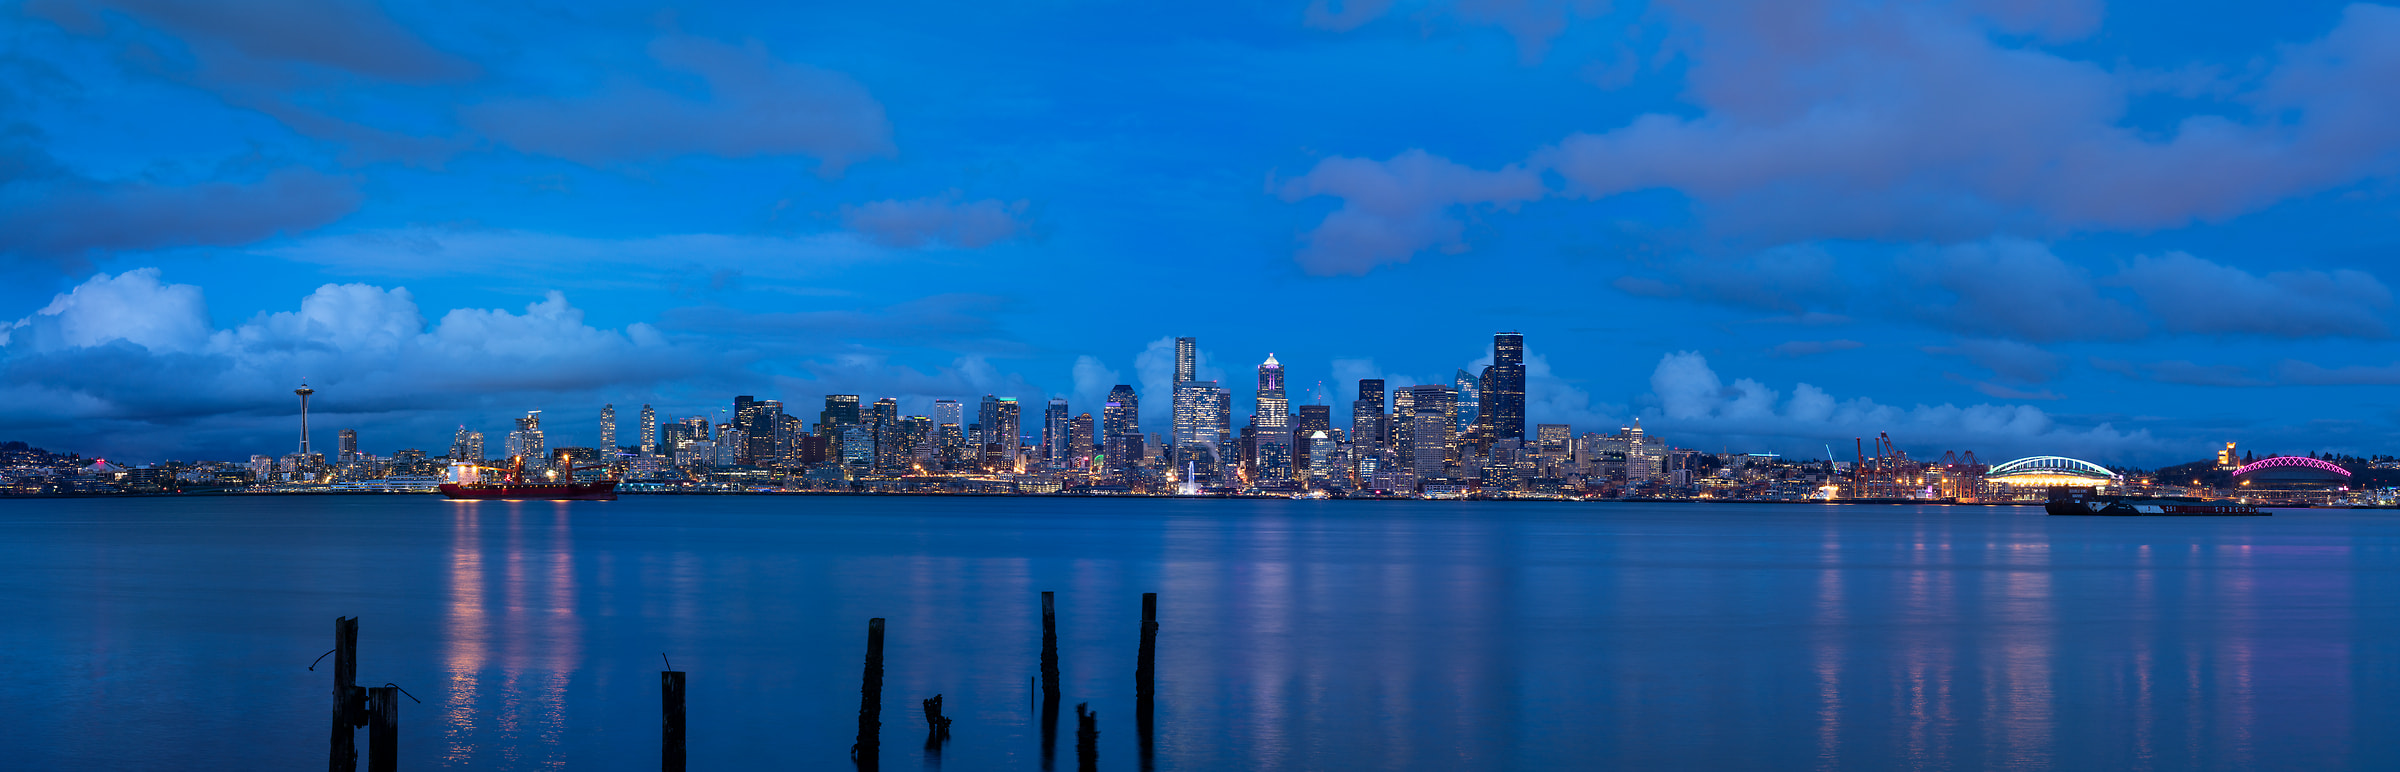 363 megapixels! A very high resolution, large-format VAST photo print of the Seattle skyline at twilight with the Puget sound in the foreground and the Space Needle in the background; photograph created by Greg Probst in Seattle, Washington.